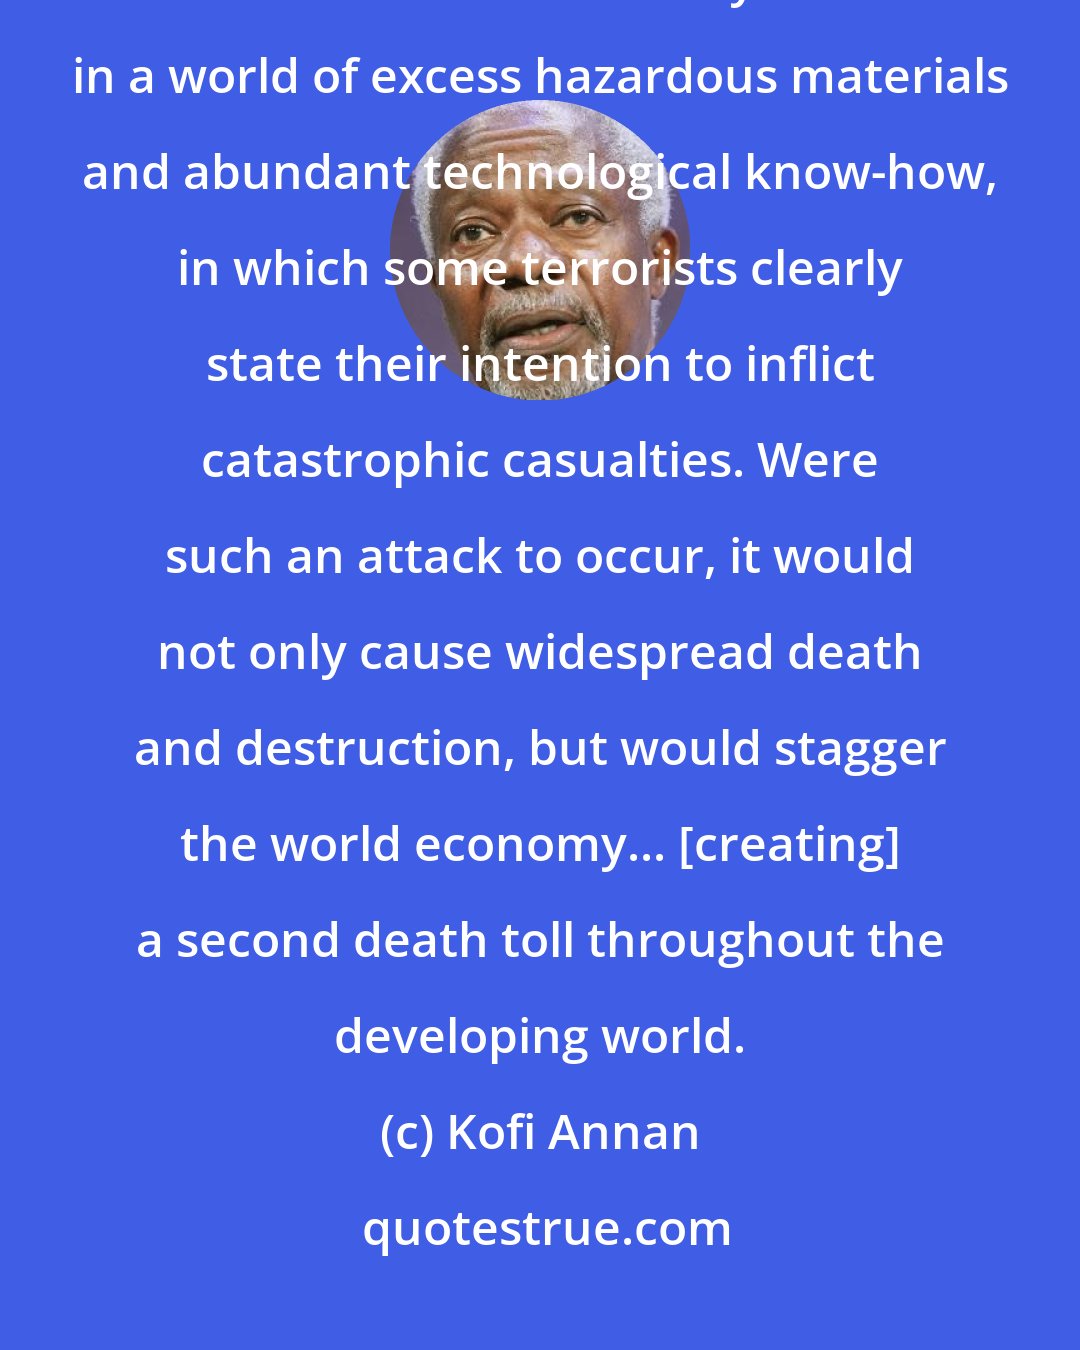 Kofi Annan: Nuclear terrorism is still often treated as science fiction. I wish it were. But unfortunately we live in a world of excess hazardous materials and abundant technological know-how, in which some terrorists clearly state their intention to inflict catastrophic casualties. Were such an attack to occur, it would not only cause widespread death and destruction, but would stagger the world economy... [creating] a second death toll throughout the developing world.